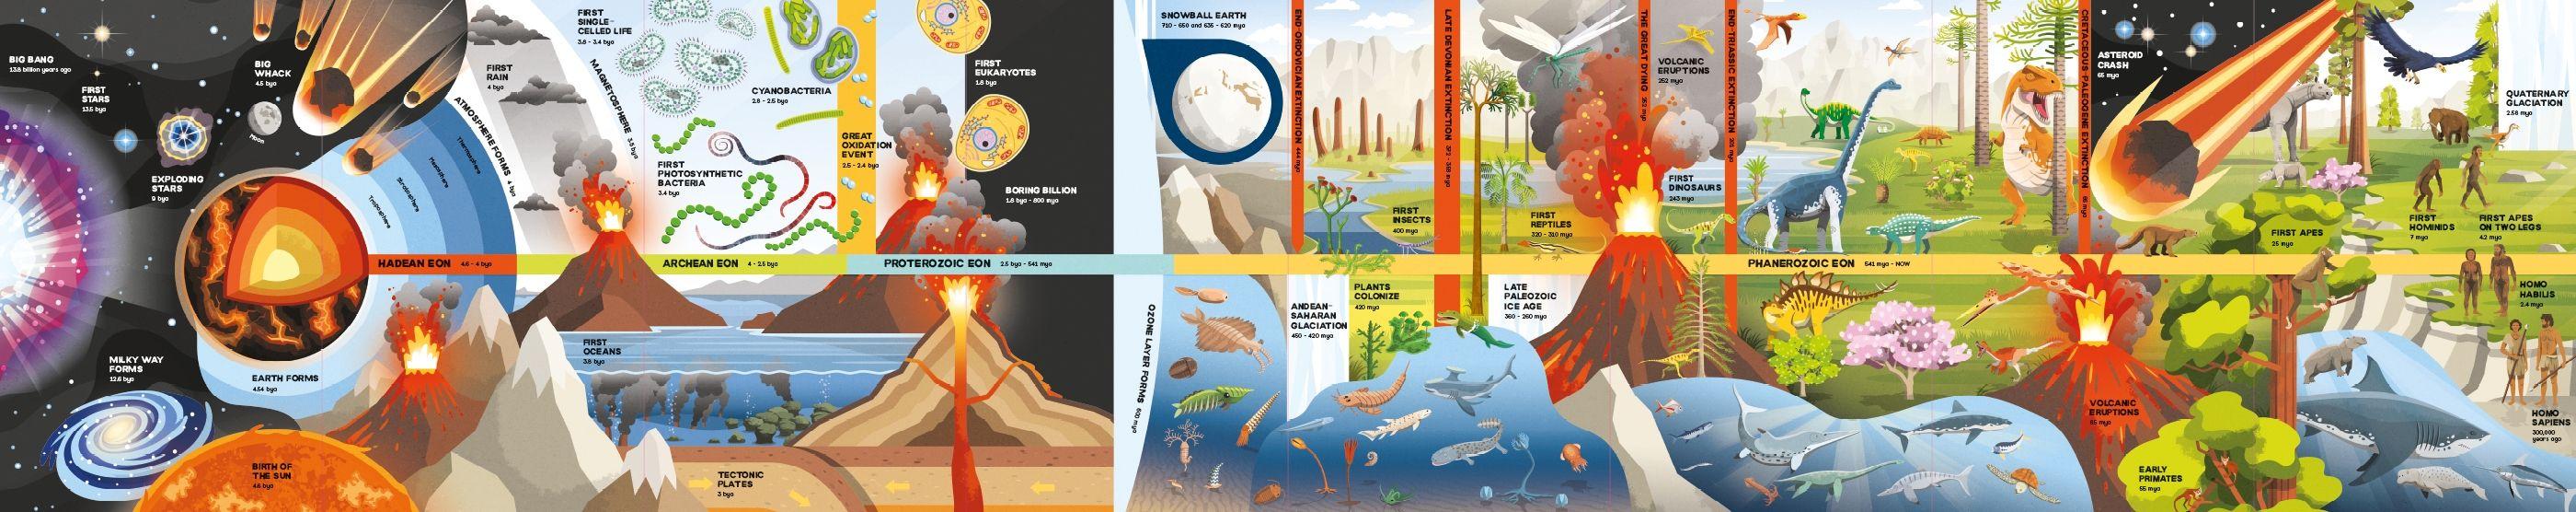 Fold-out Timeline Of Planet Earth